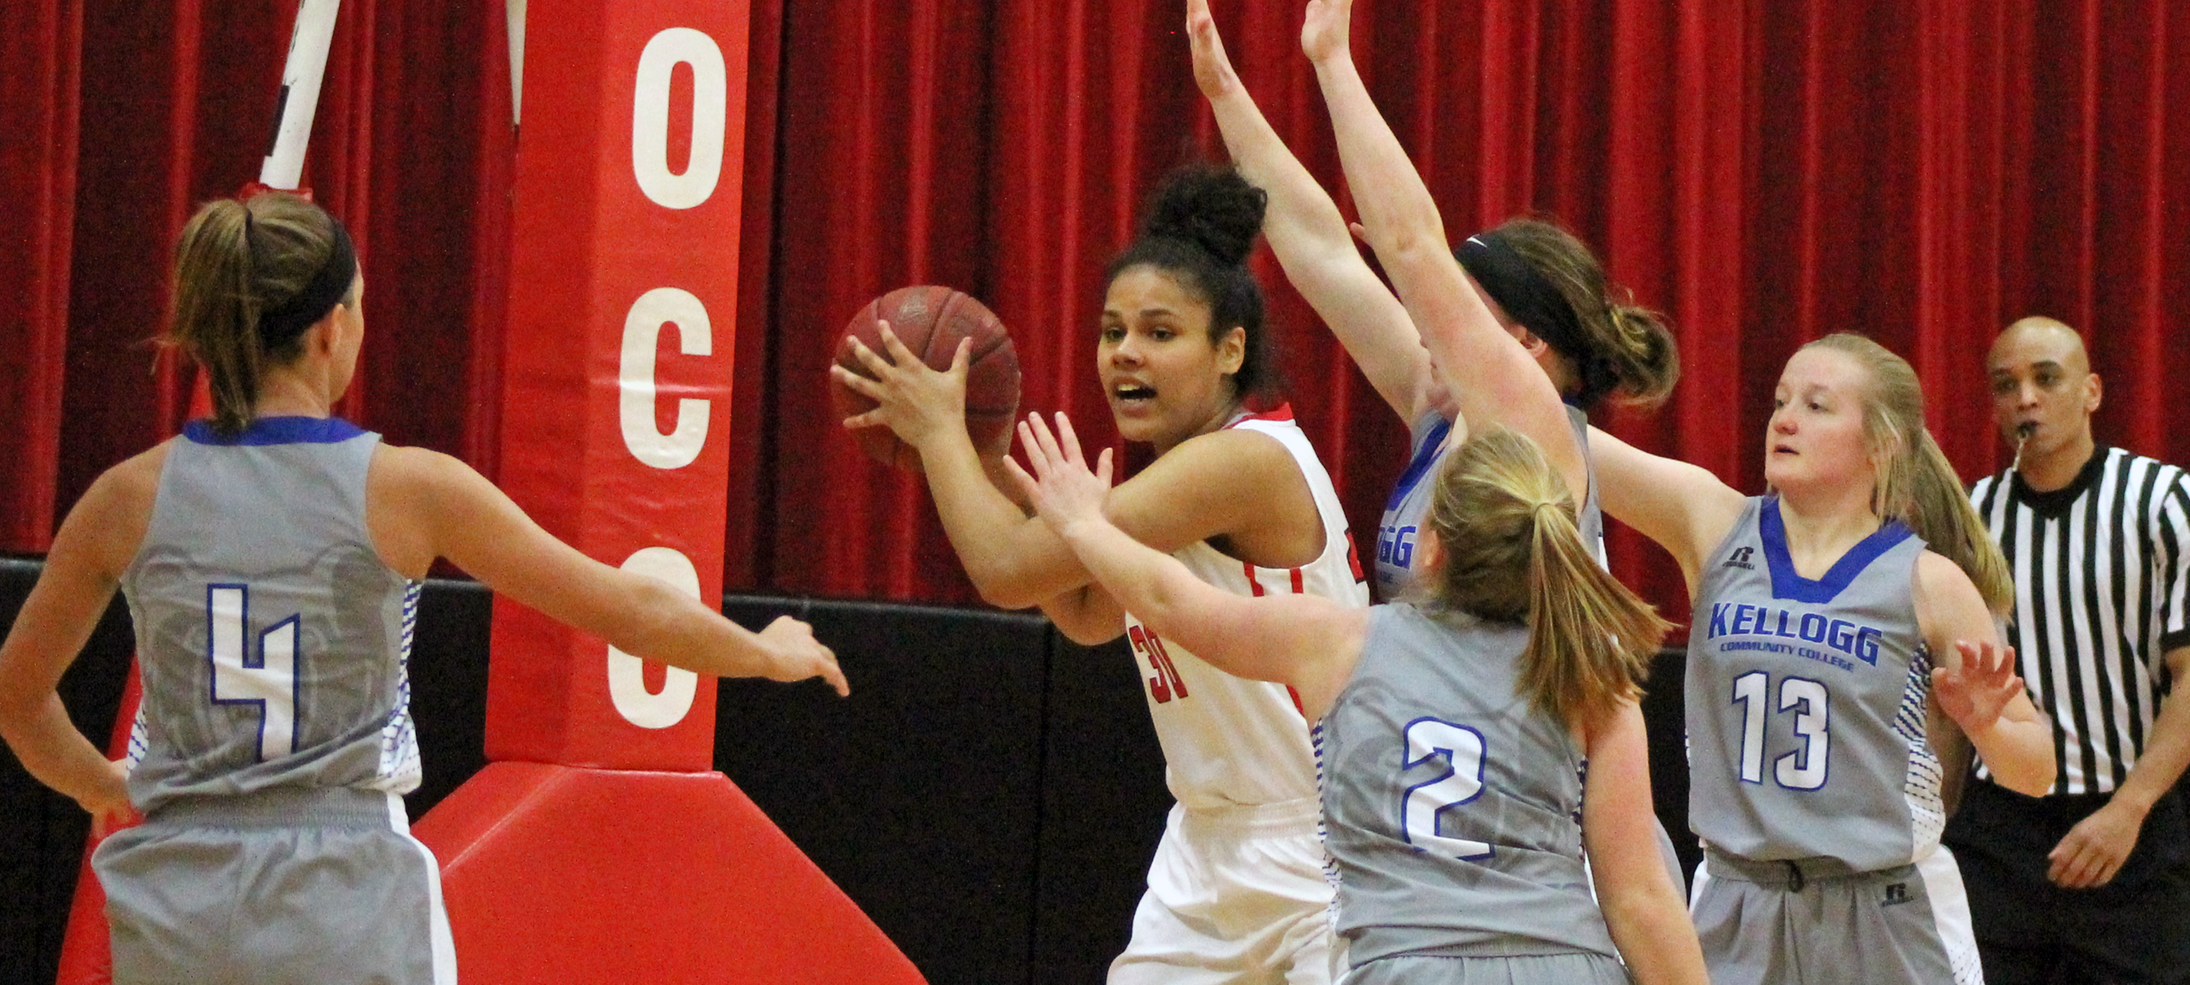 Kaylah Ivey, who had 14 points and 15 rebounds, looks to pass out of the post against Kellogg. Photo by Nicholas Huenefeld/Owens Sports Information